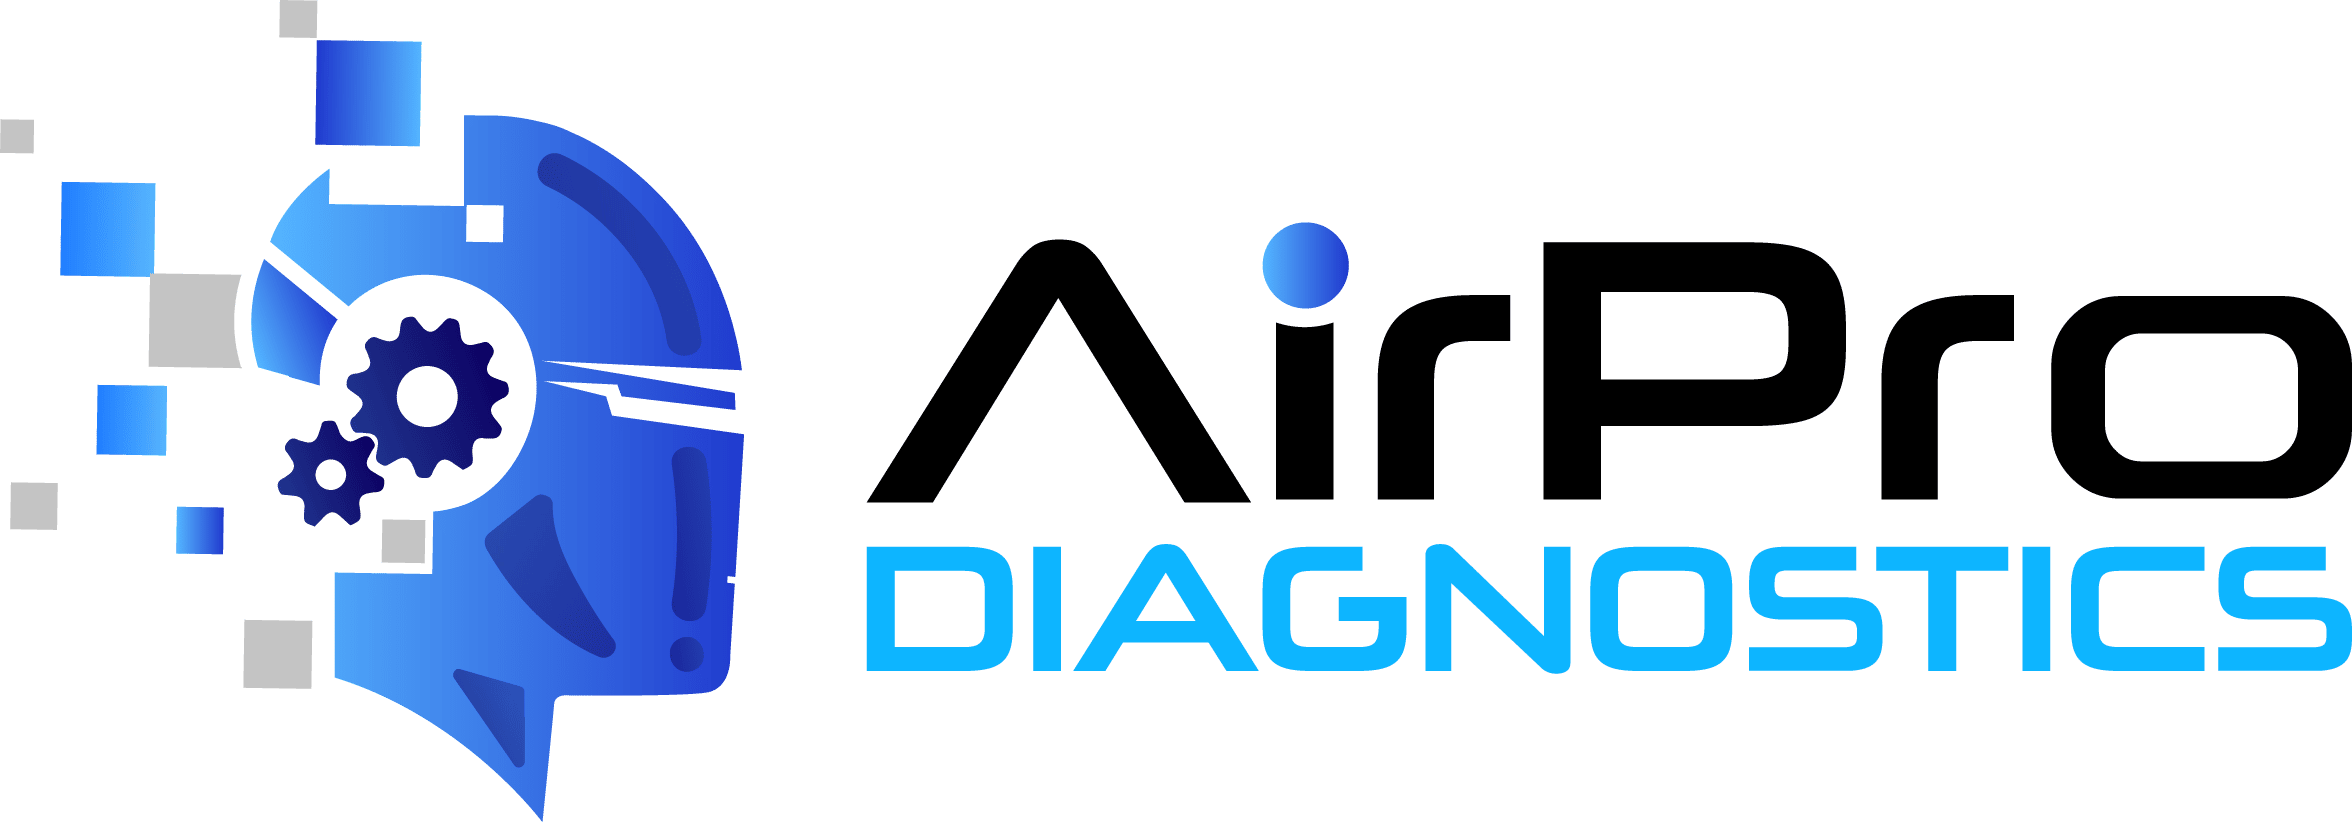 AirPro Diagnostics | Remote Diagnostics & ADAS Scanning | General Motors Joins AirPro in Educational Webinar | AirPro Diagnostics | Remote Diagnostics & ADAS Scanning